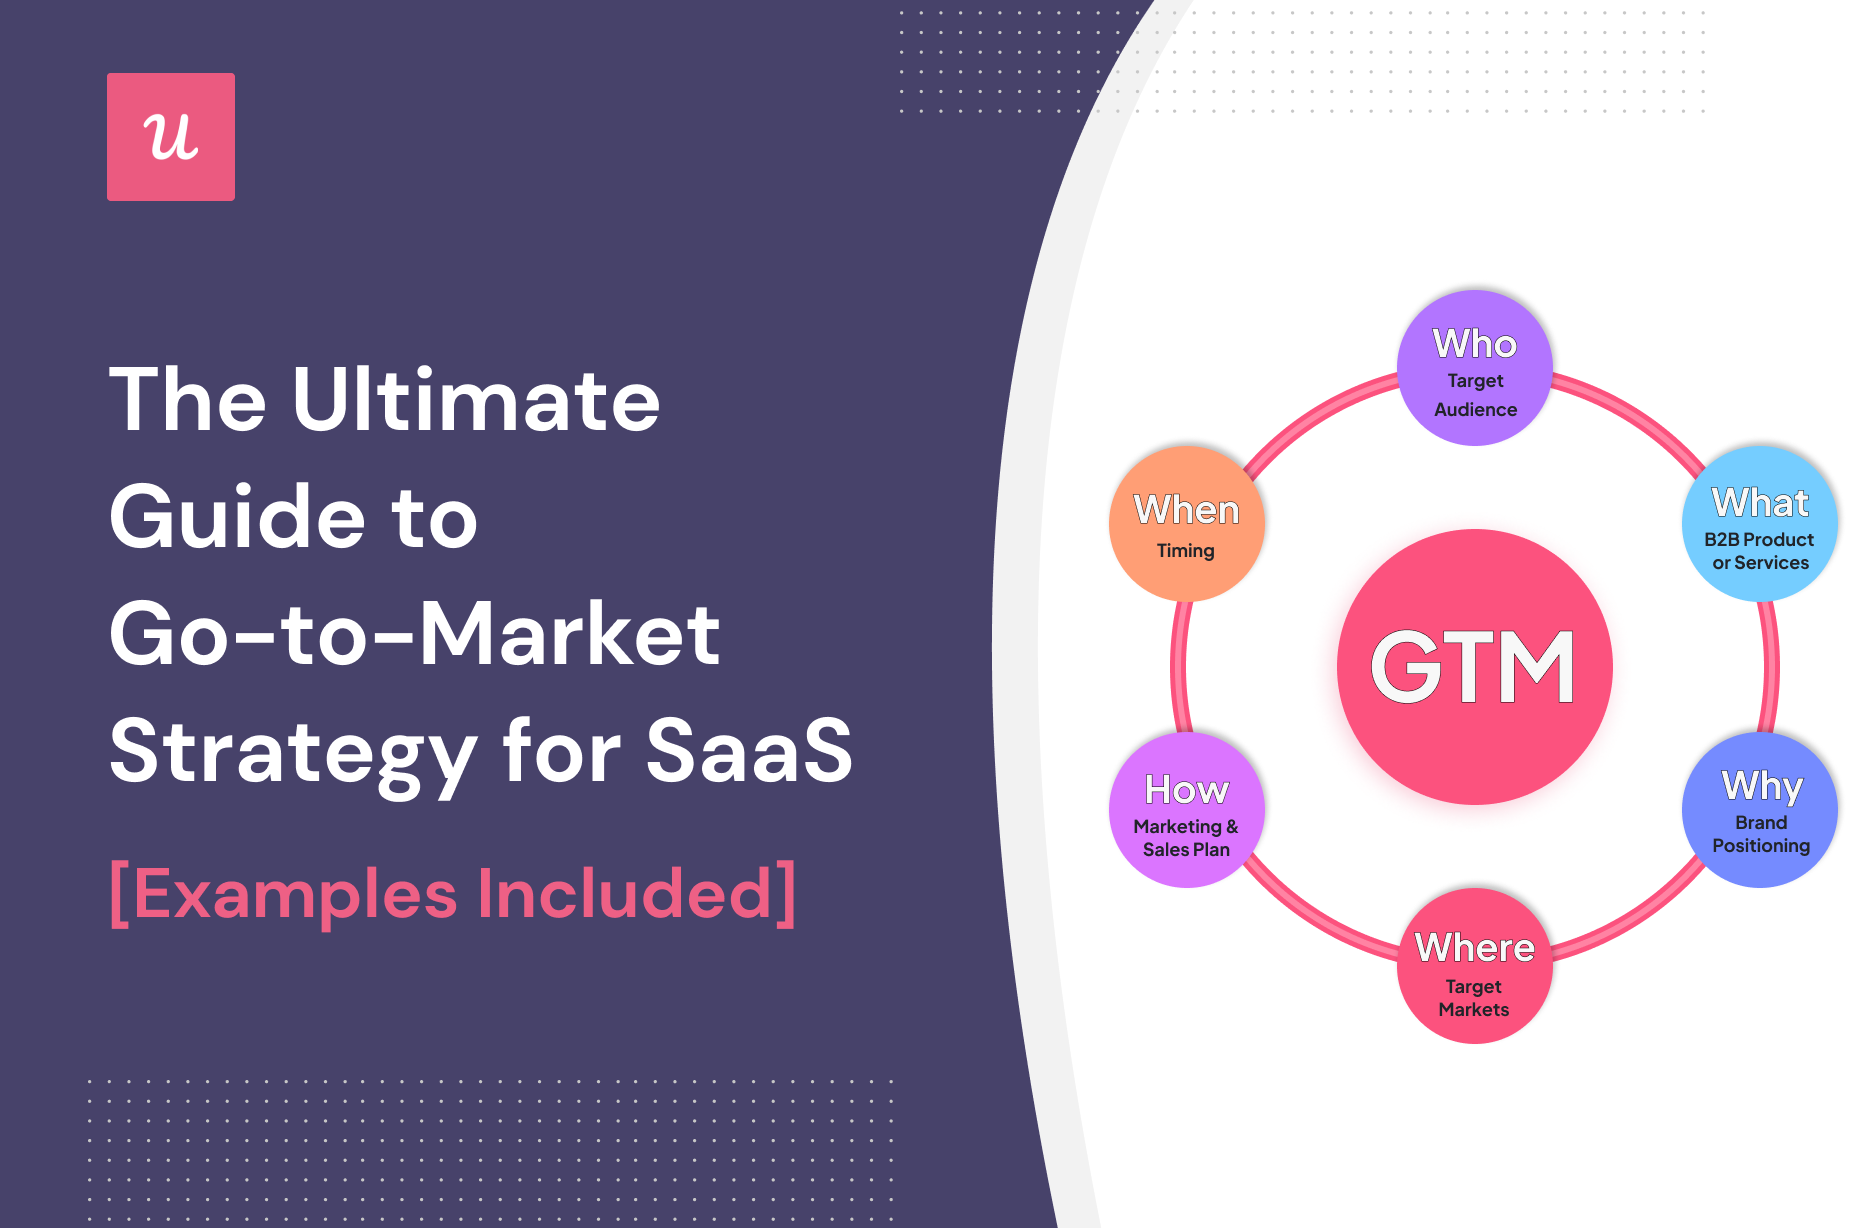 The Ultimate Guide to Go-to-Market Strategy for SaaS [Examples Included]